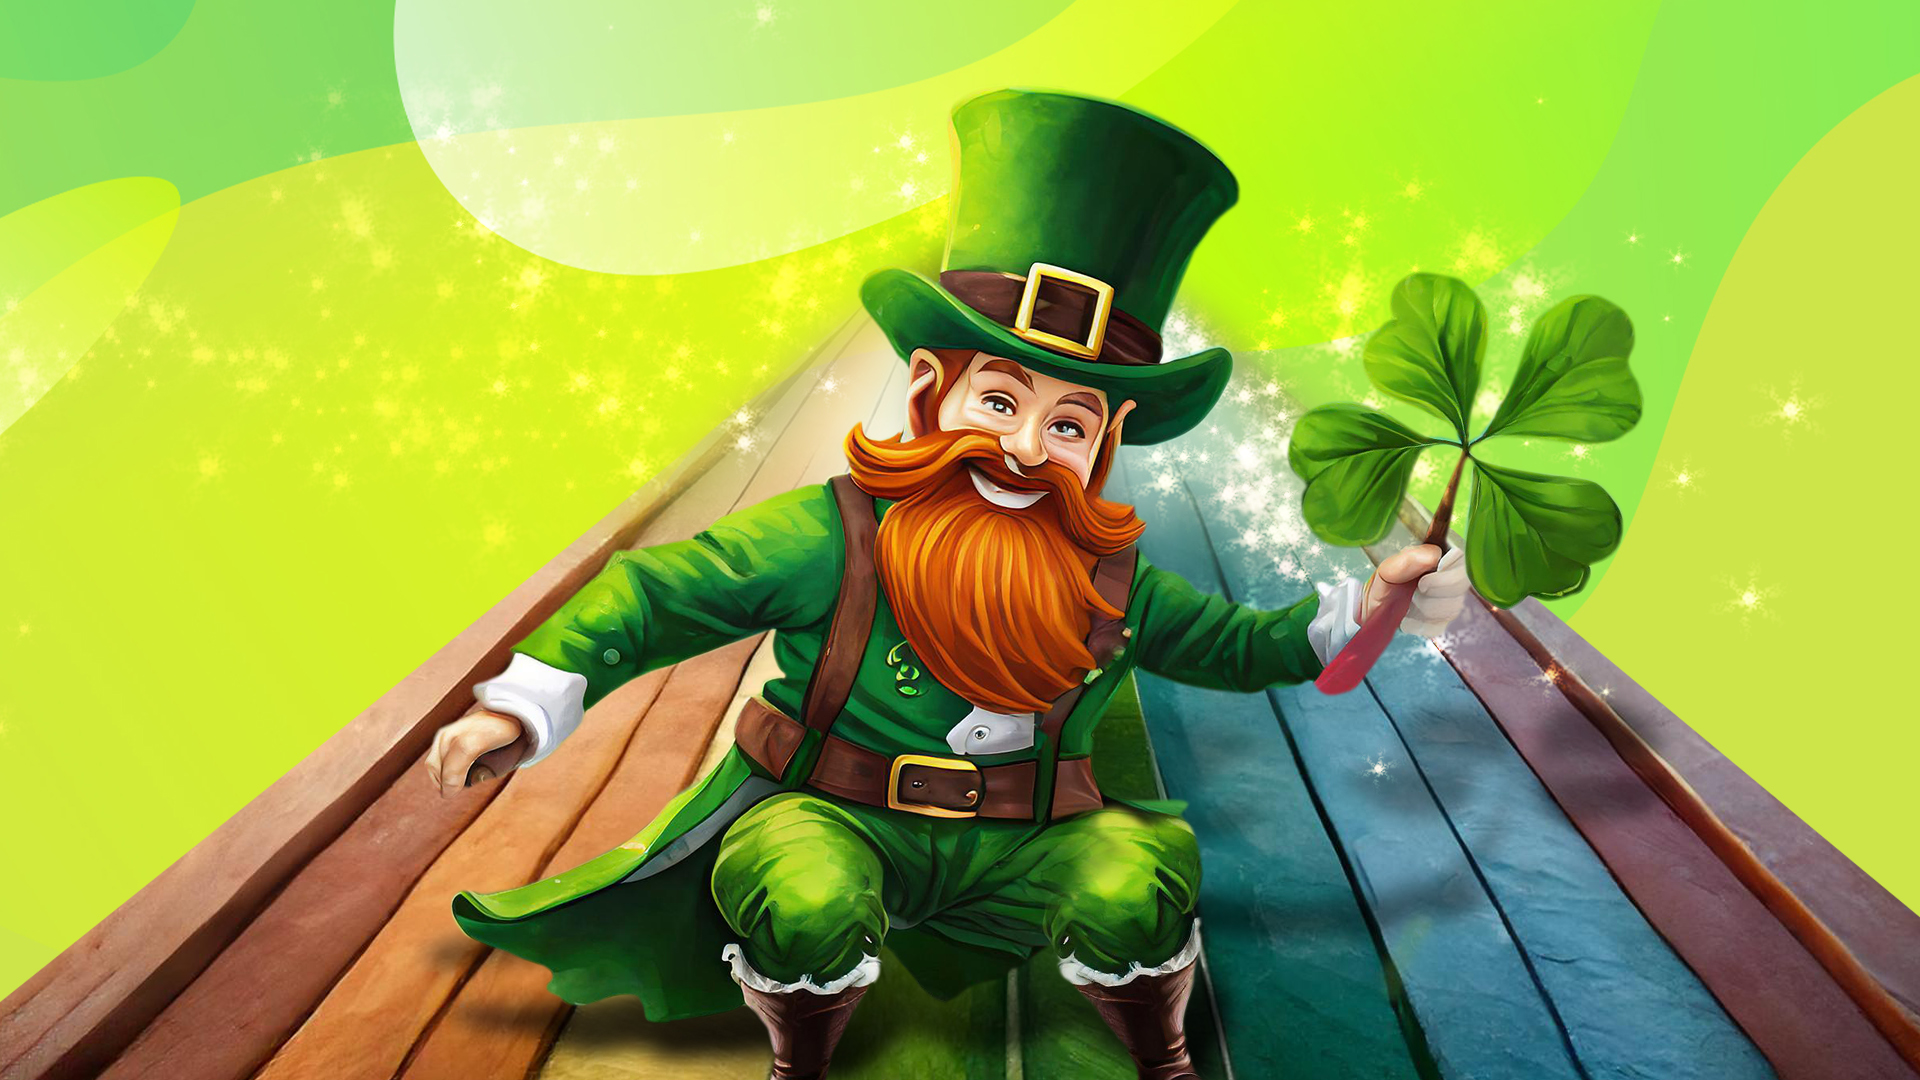 A traditional Irish leprechaun is sitting on a wooden surface holding a three leaf clover, on a two-tone green background.